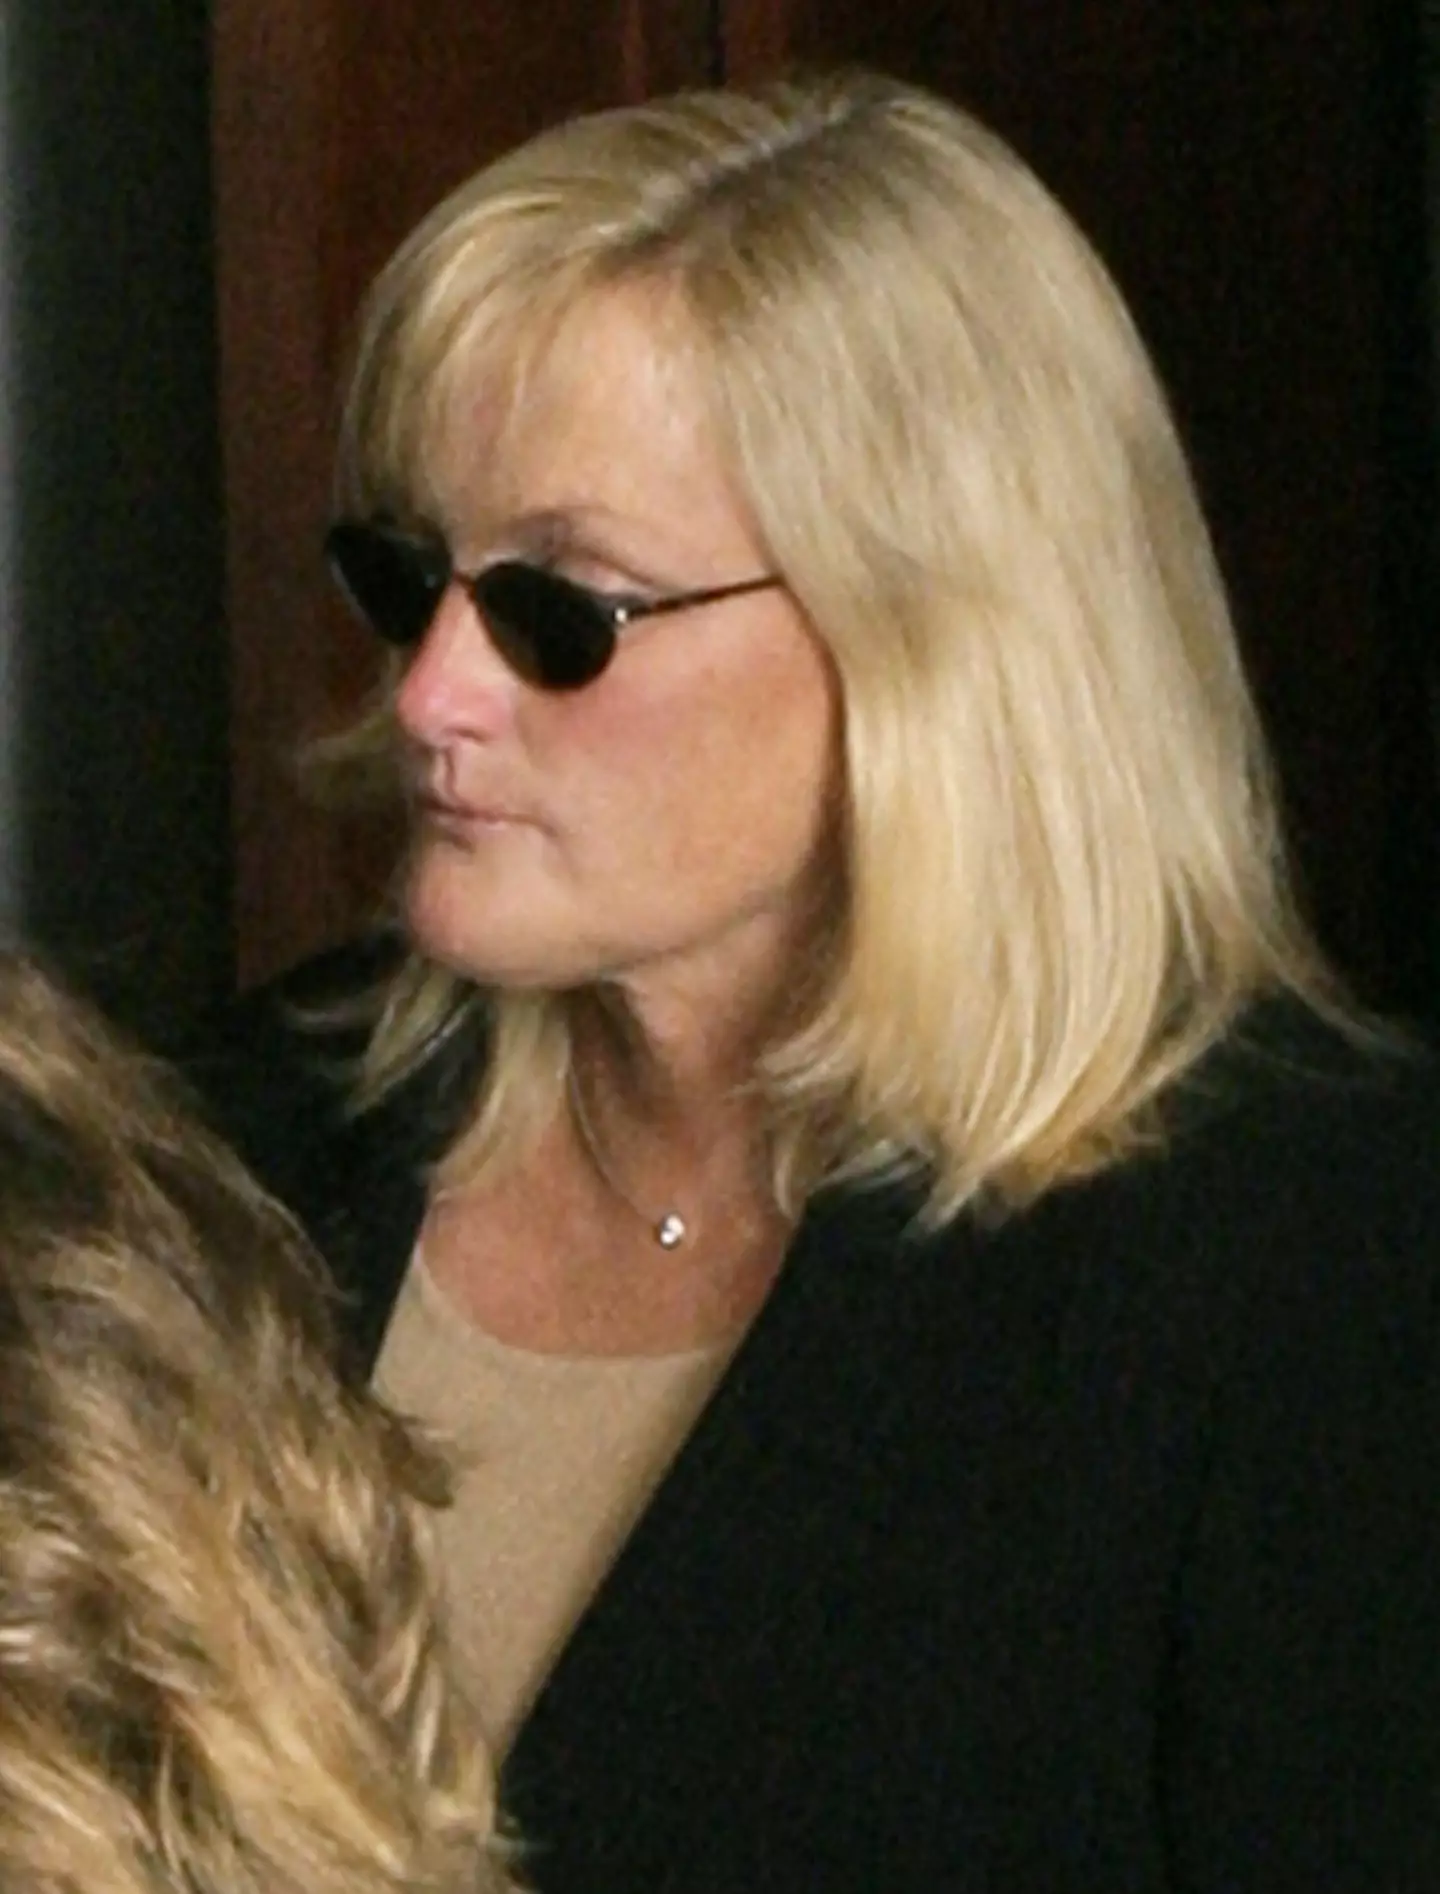 Debbie Rowe admitted she ‘should have done more’ in the face of Jackson's painkiller addiction.